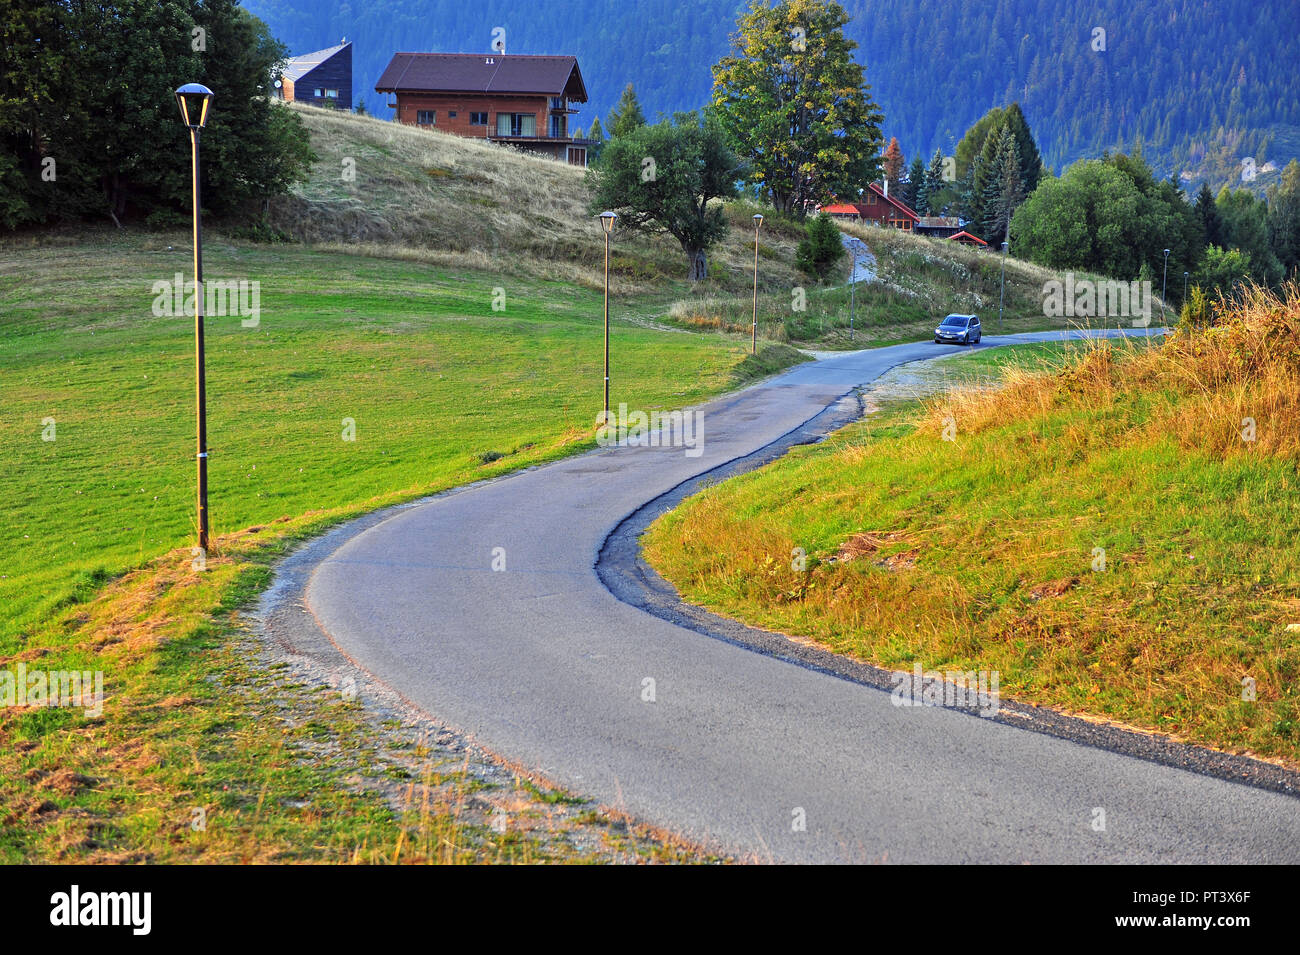 DONOVALY, SLOVAKIA - SEPTEMBER 20: Car moving by the rural road in Donovaly village, Slovakia on September 20, 2018. Stock Photo